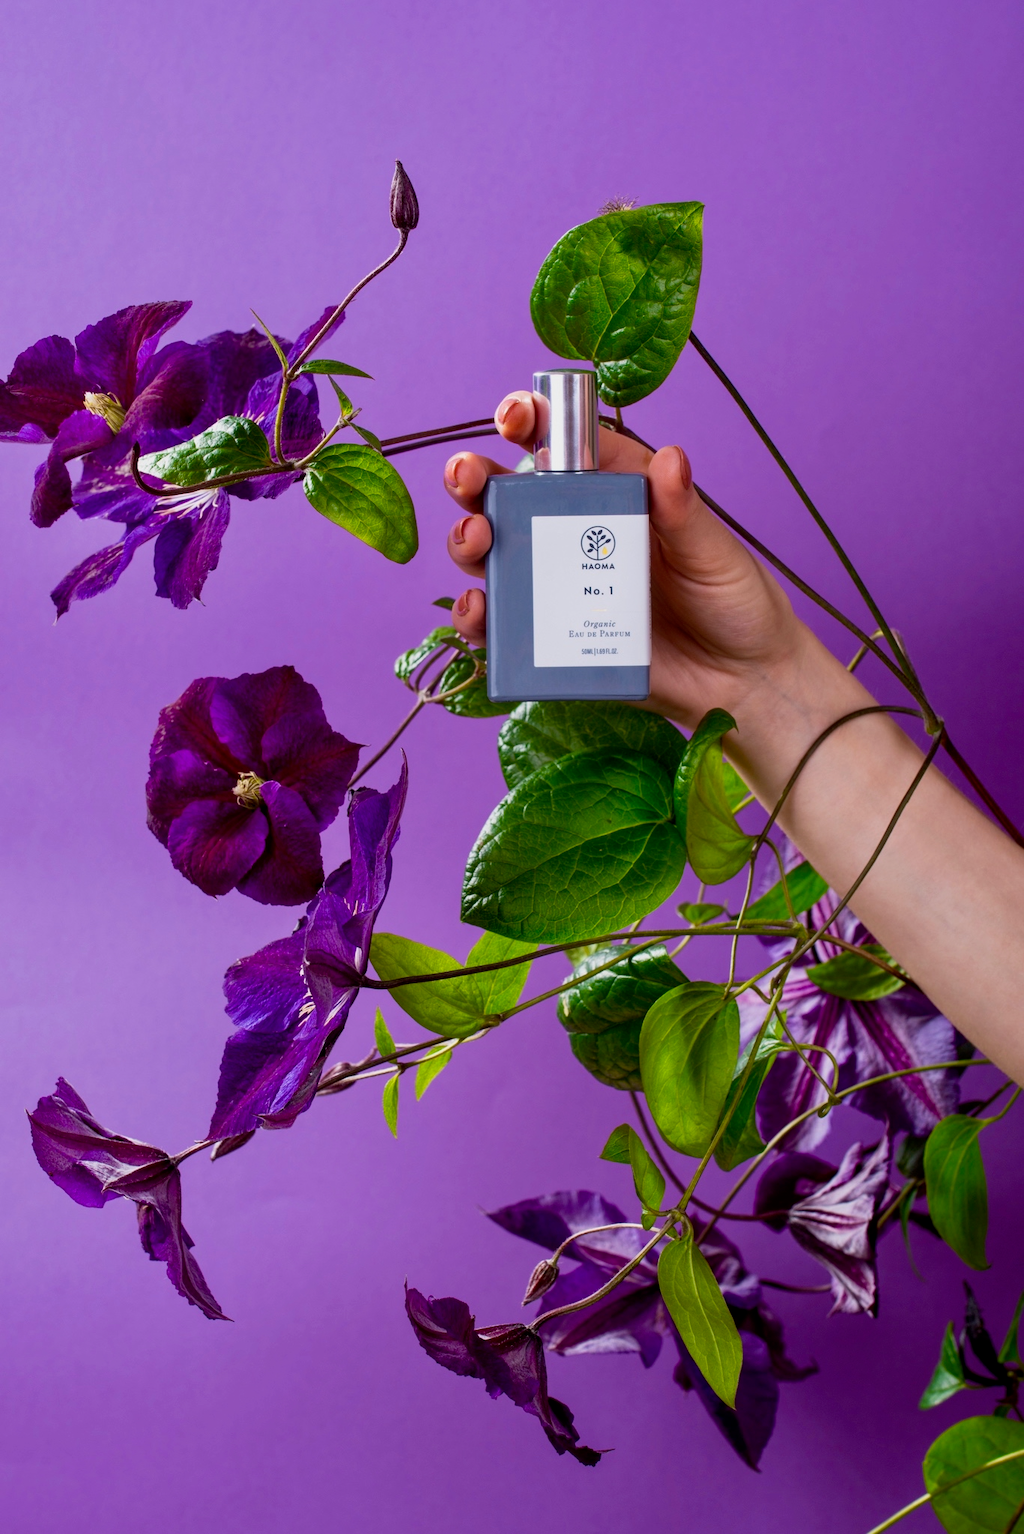 Haoma Organic Eau de Parfum. Certified vegan perfumes. The No.1 Blend bottle is shown held in someone's had with a vine of leaves and purple flowers wrapped around and behind.